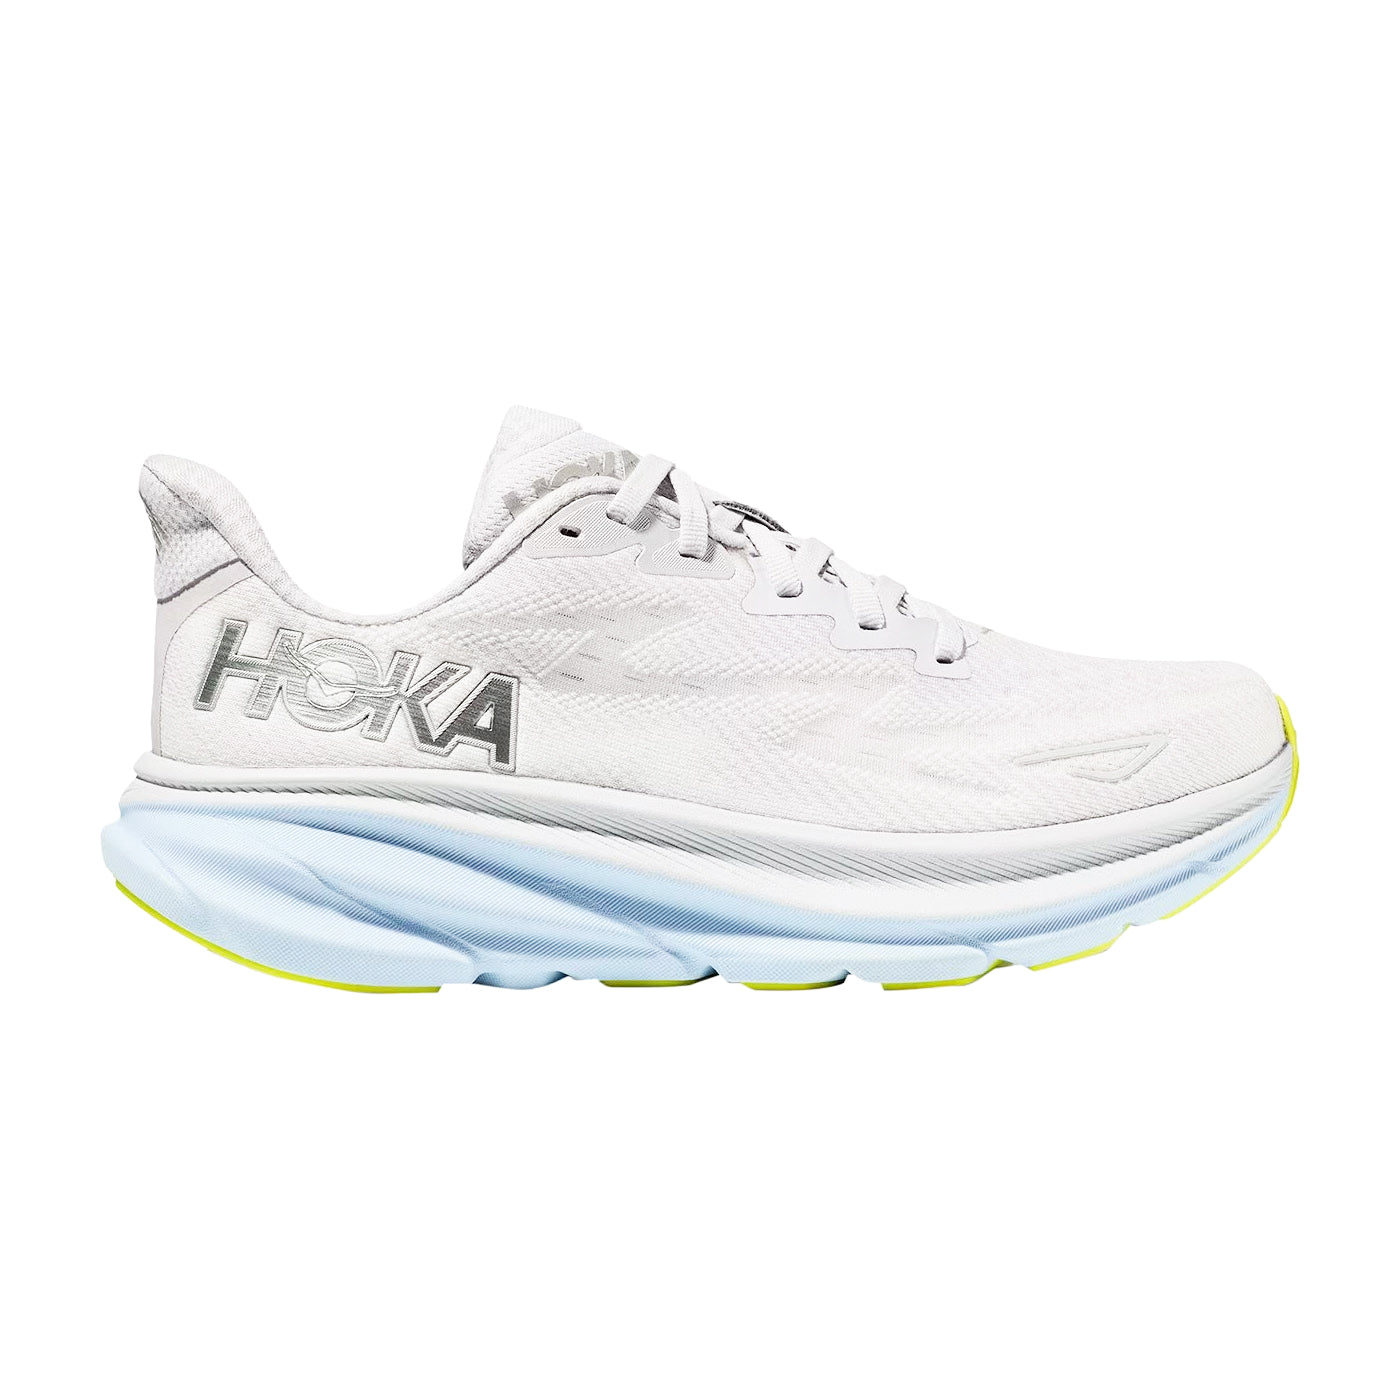 White Hoka Clifton 9 Nimbus/Ice running shoe with a thick, cushioned sole and the Hoka logo prominently displayed on the side.